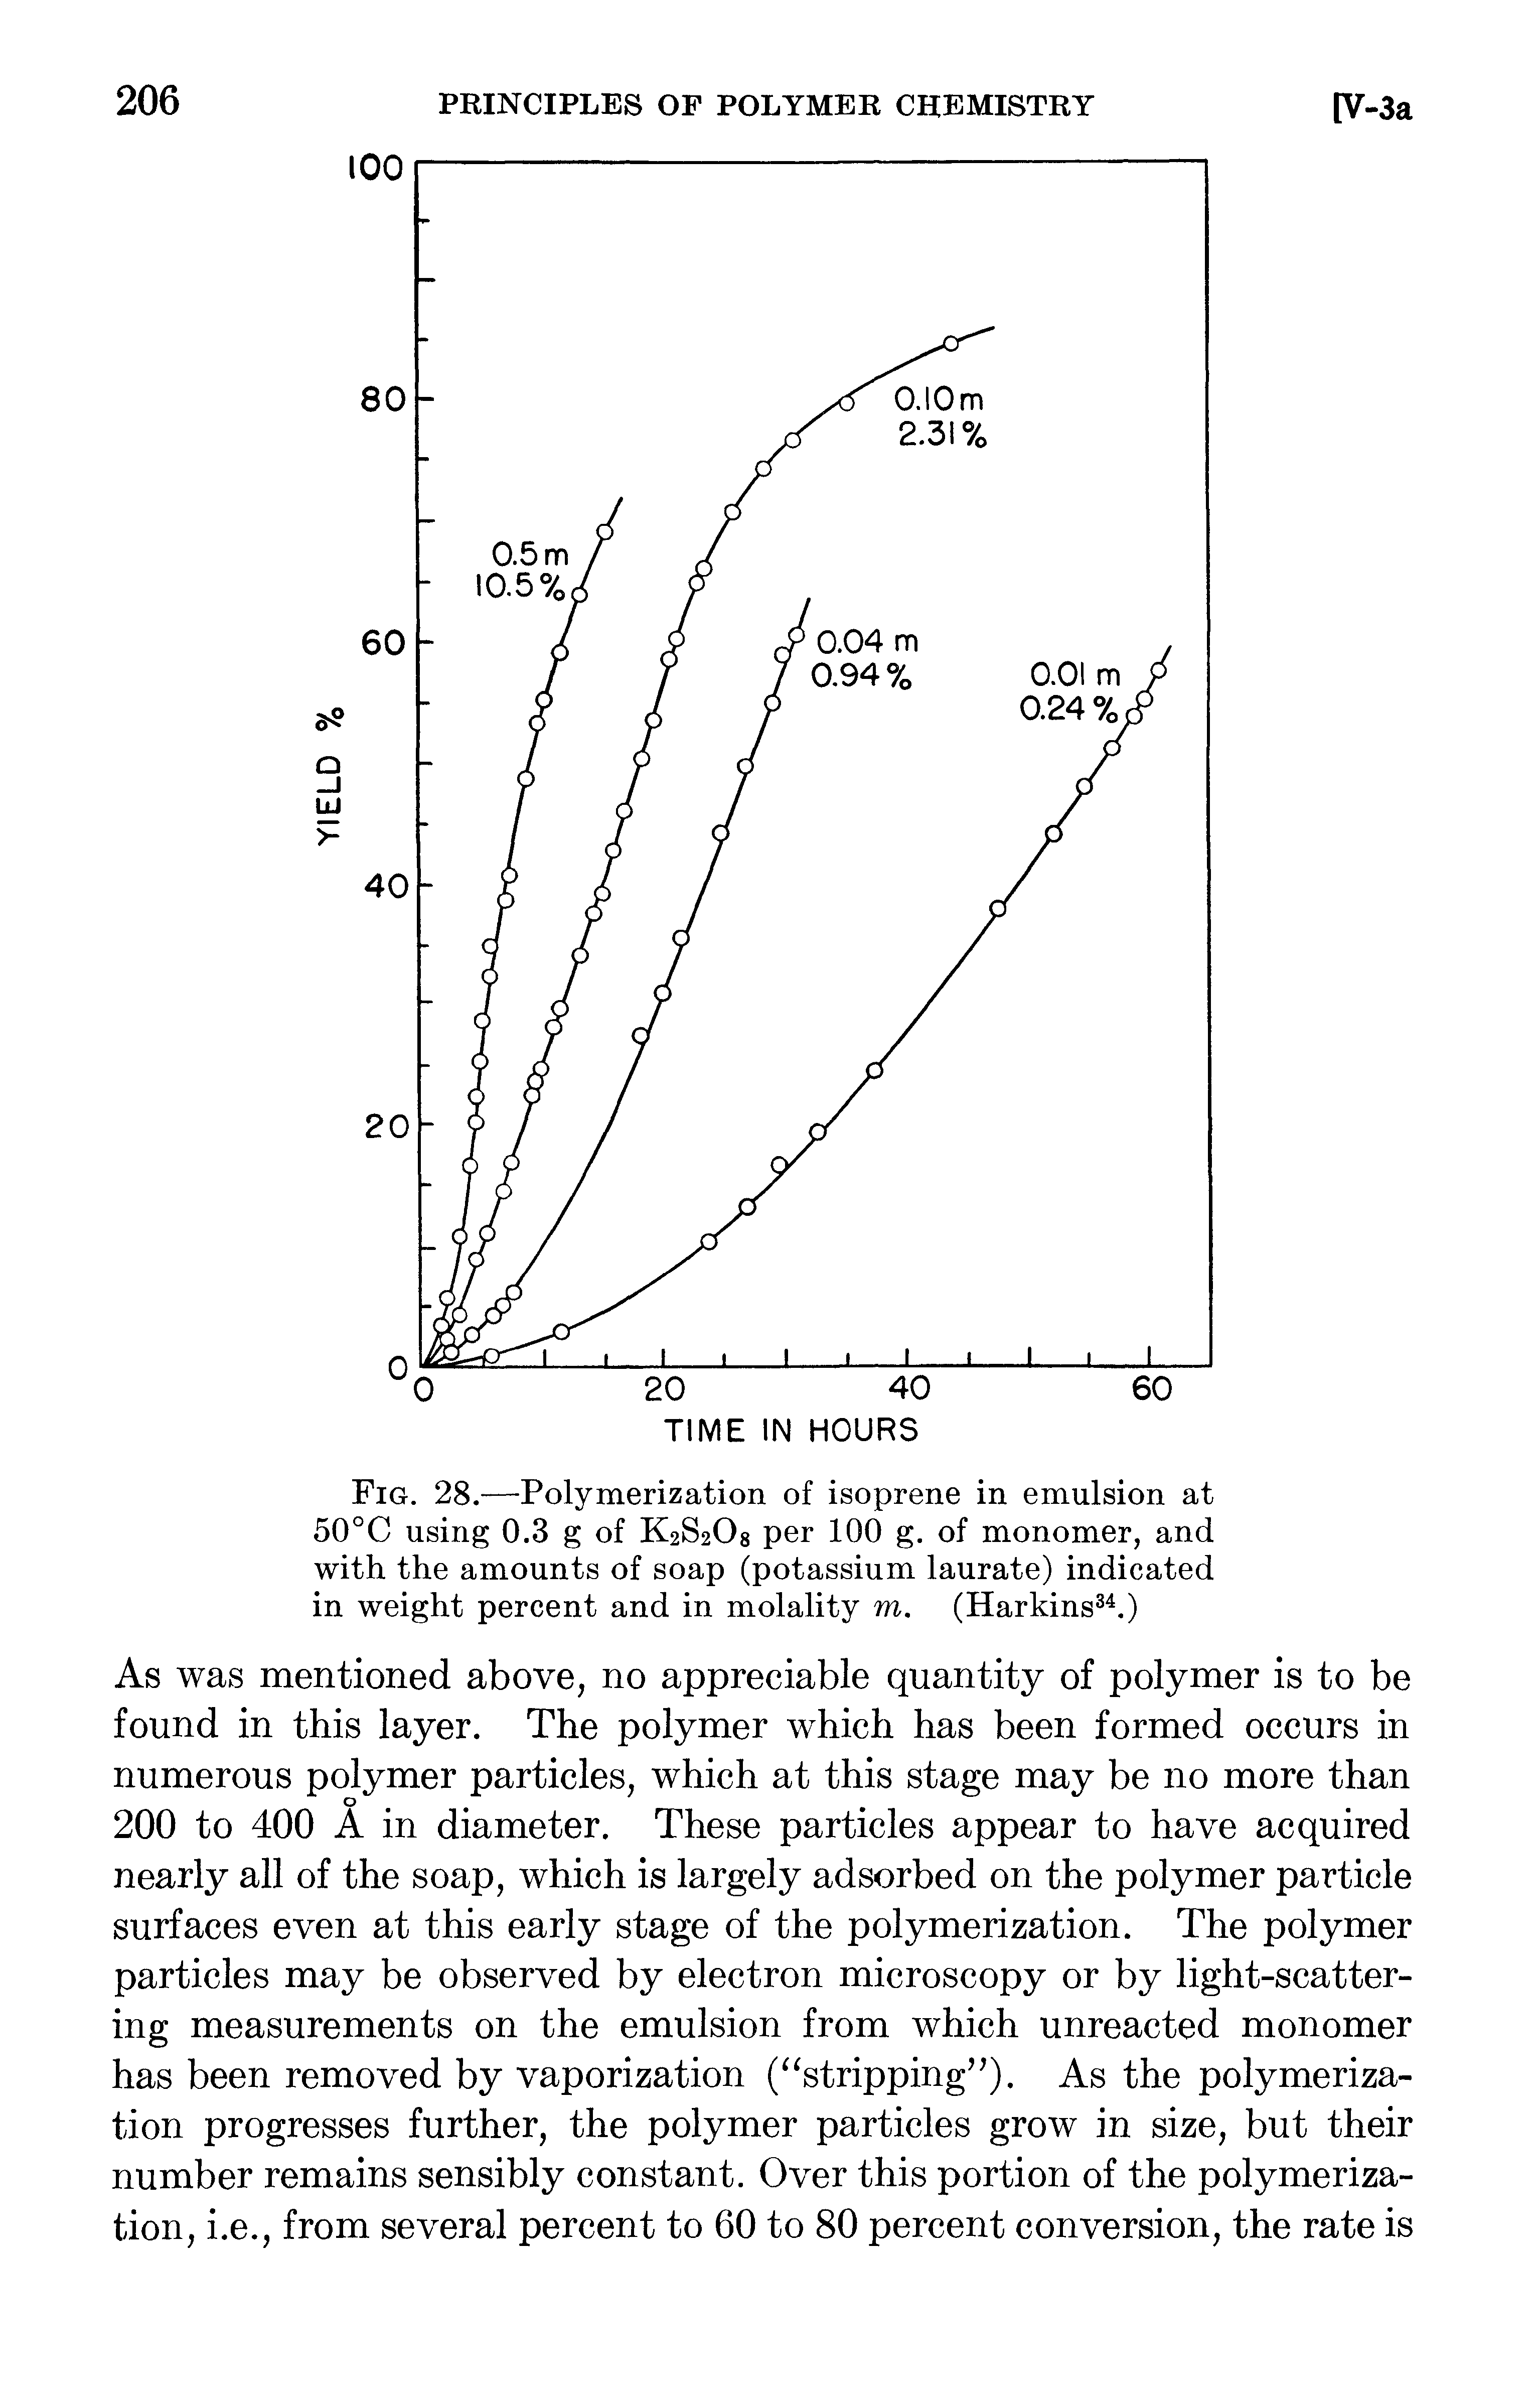 Fig. 28.—Polymerization of isoprene in emulsion at 50°C using 0.3 g of K2S2O8 per 100 g. of monomer, and with the amounts of soap (potassium laurate) indicated in weight percent and in molality m. (Harkins. )...